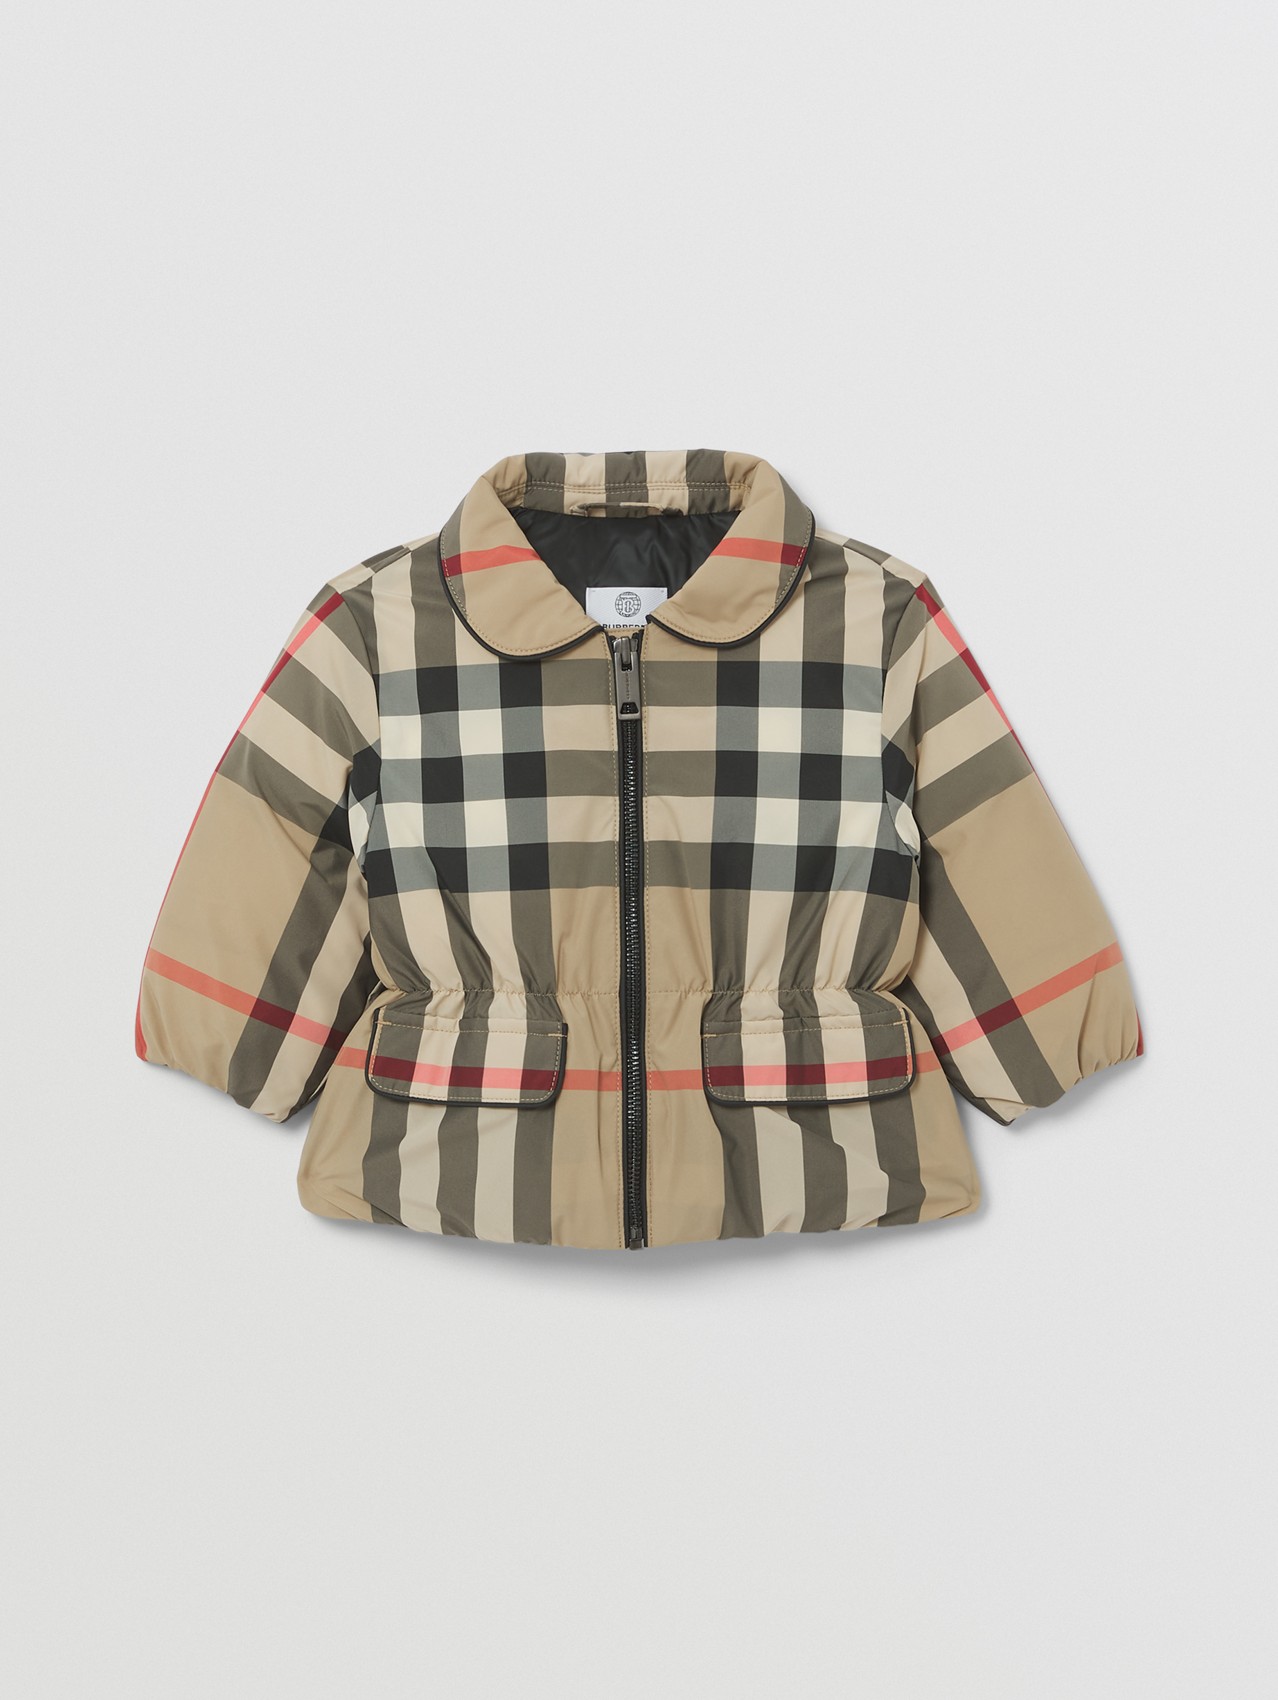 Down-filled Check Recycled Polyester Jacket in Archive Beige